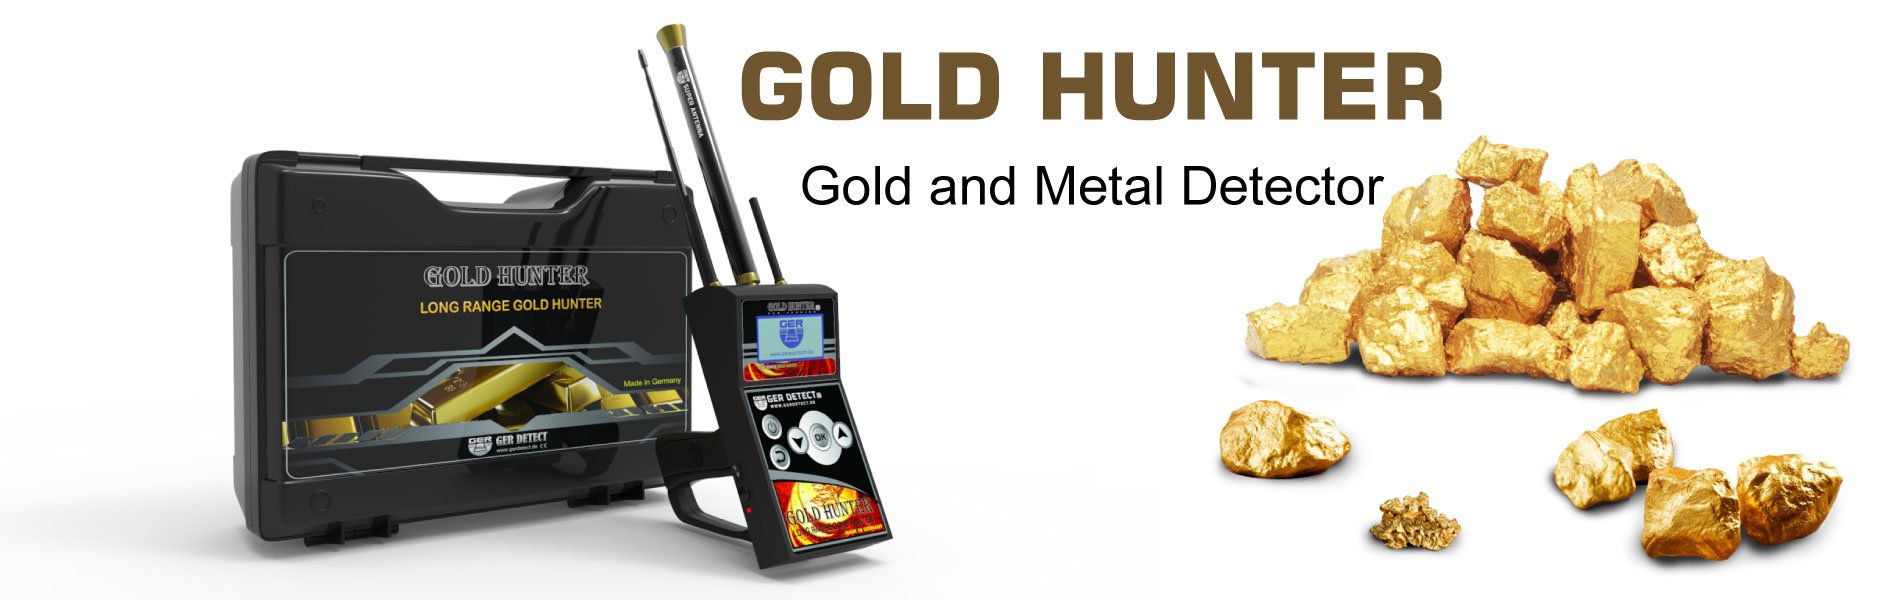 gold-hunter-device-with-long-range-system